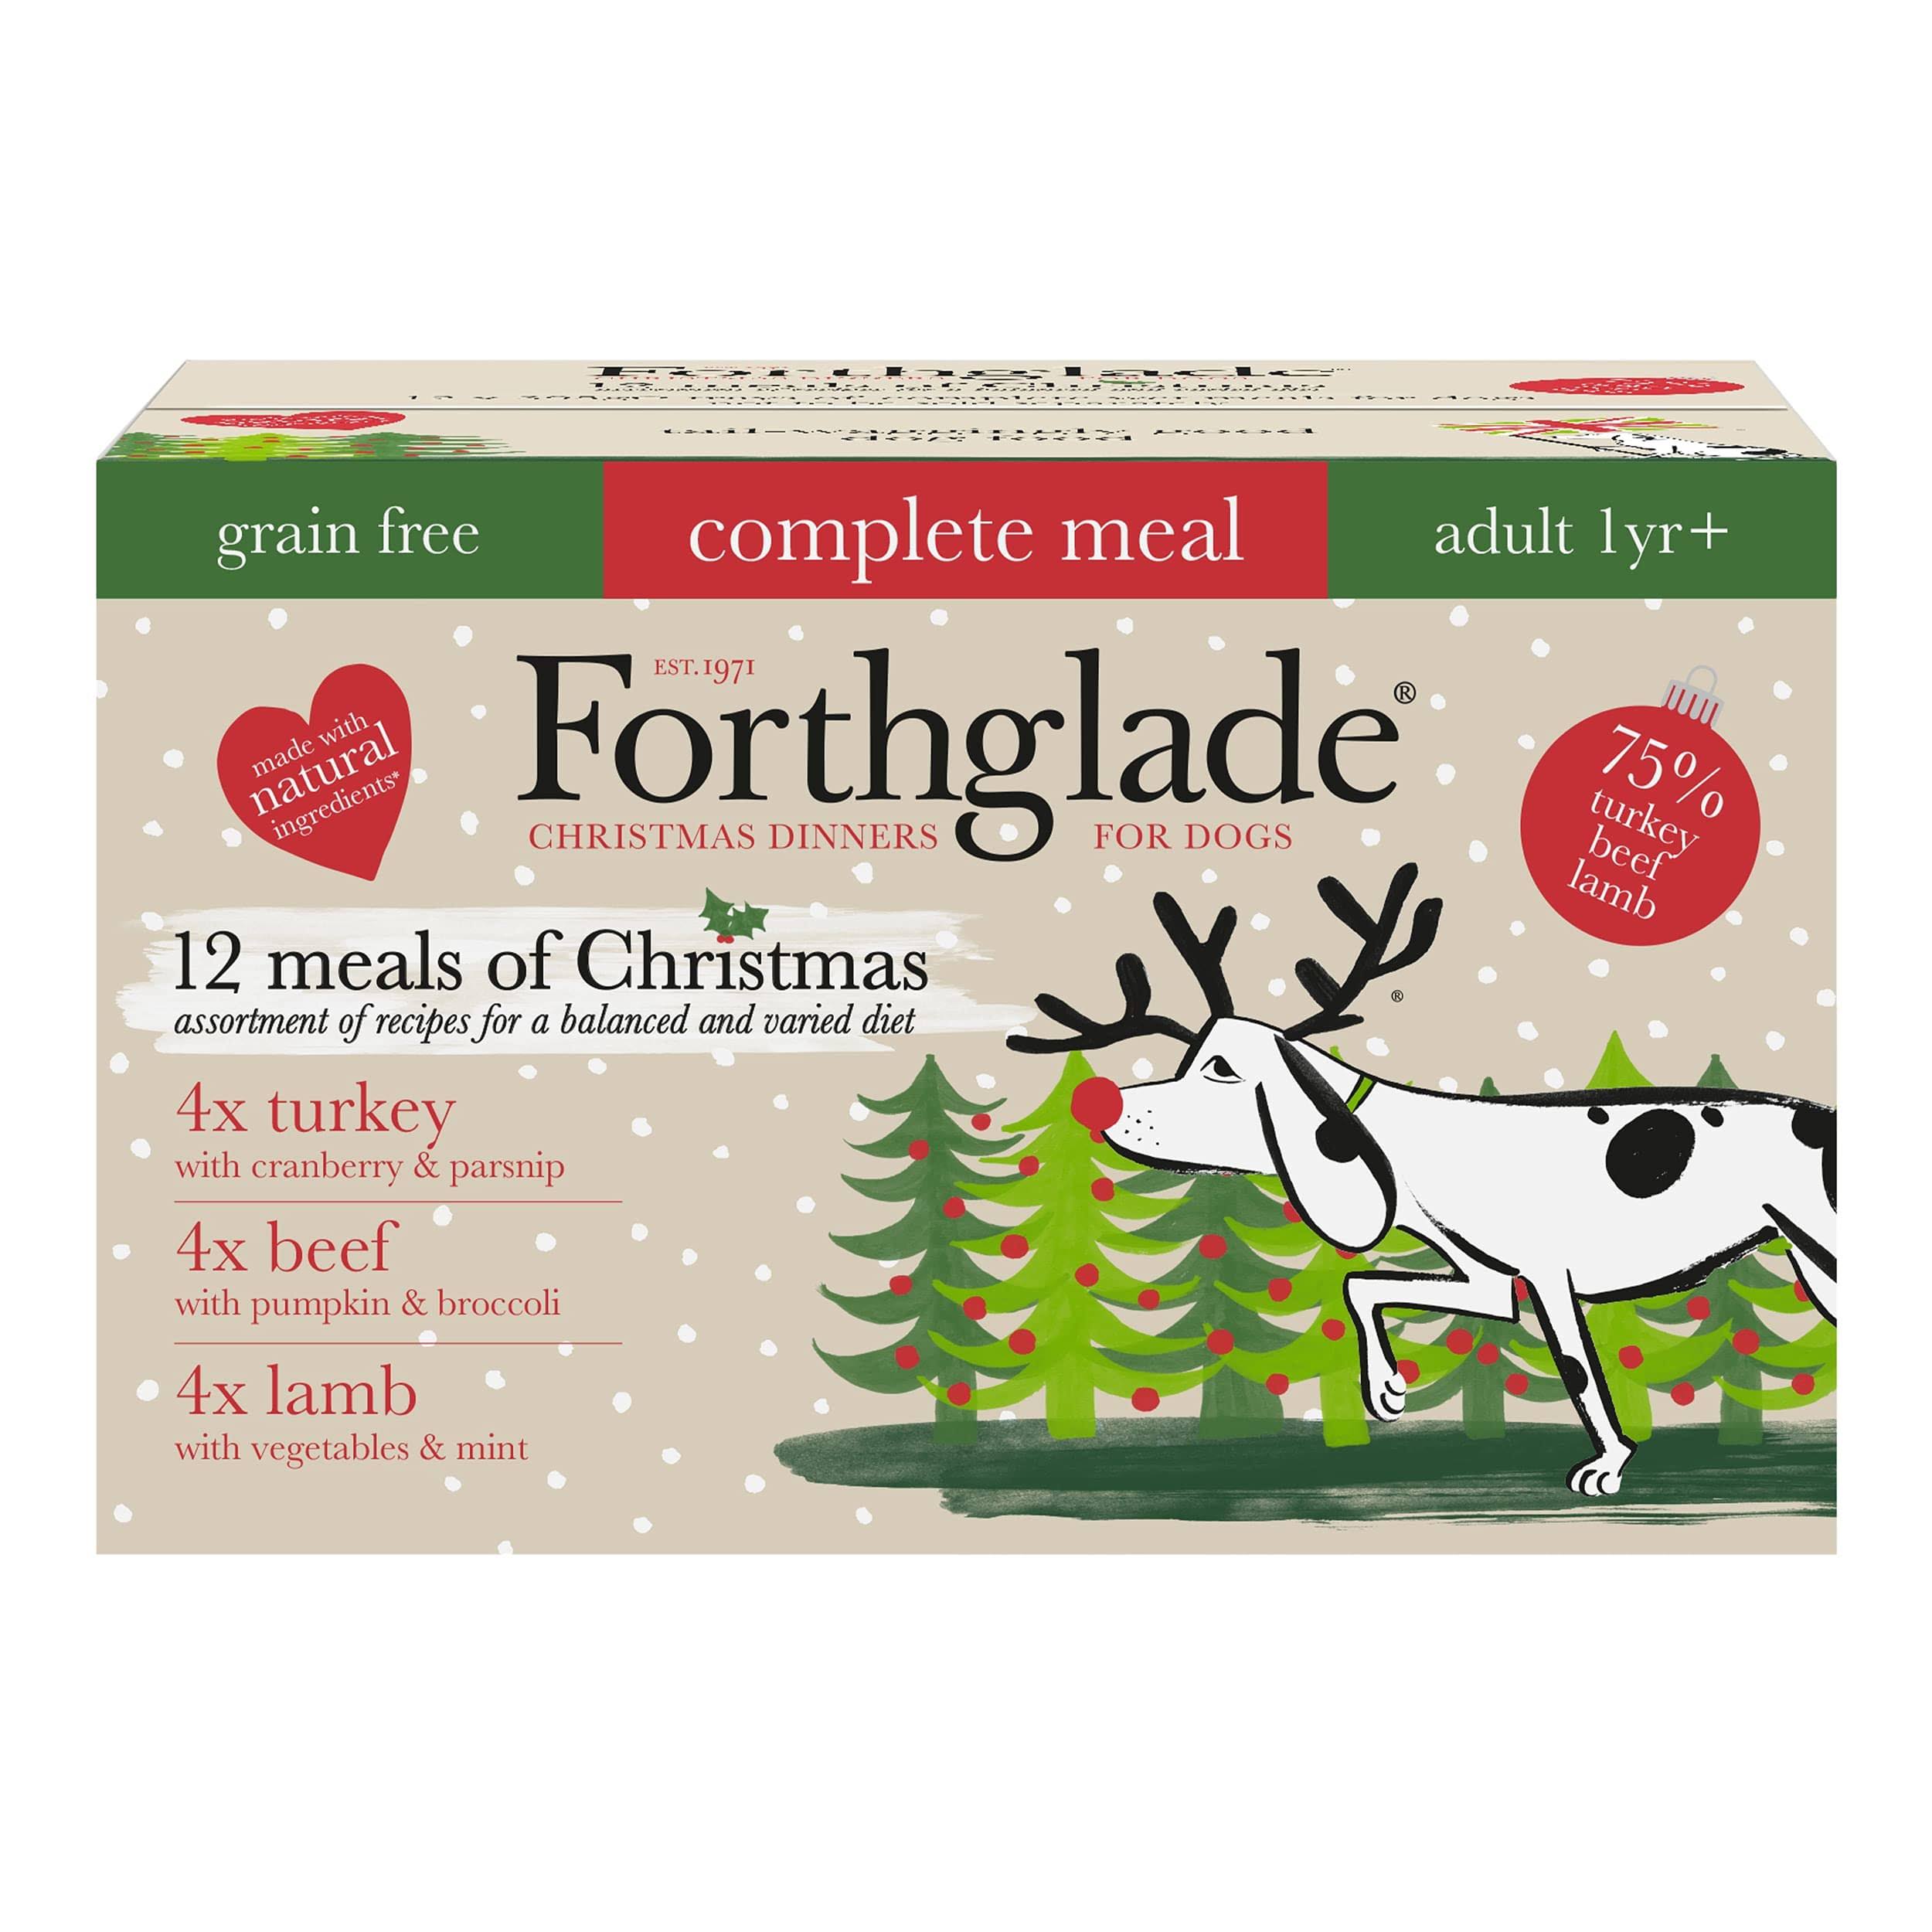 Forthglade Complete Meal Gf 12 Meals Of Christmas Multipack 12x395g